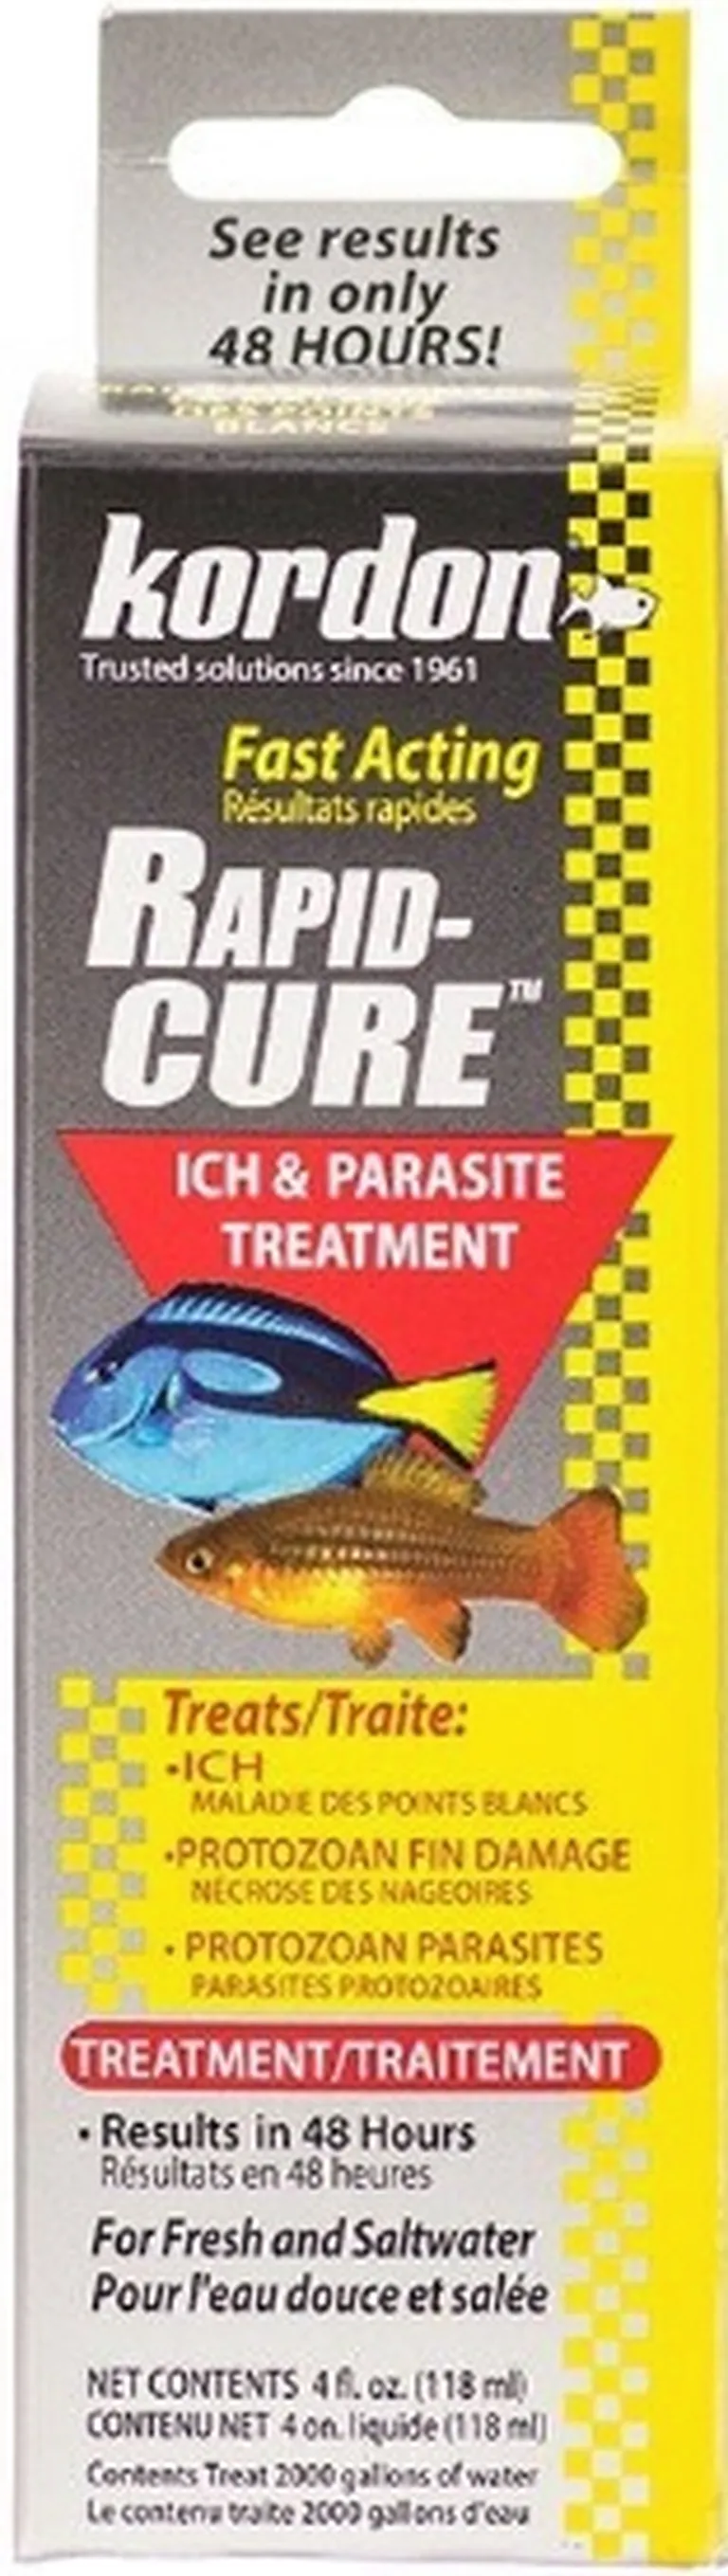 Kordon Rapid Cure Ich and Parasite Treatment Photo 1